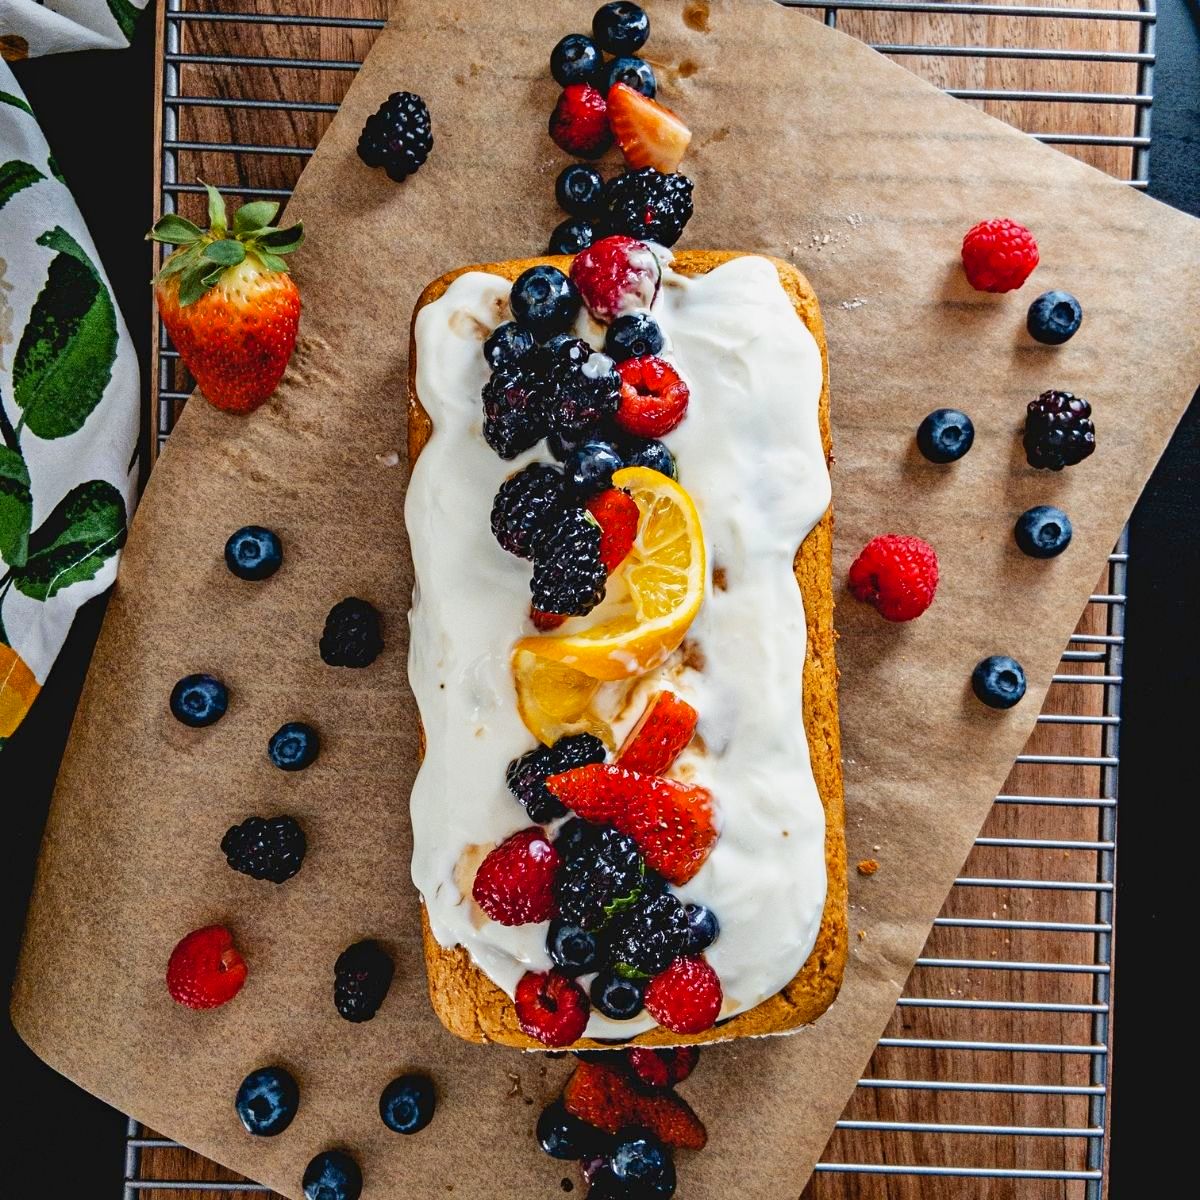 Overview of a lemon cake with white frosting and mixed berries on top.